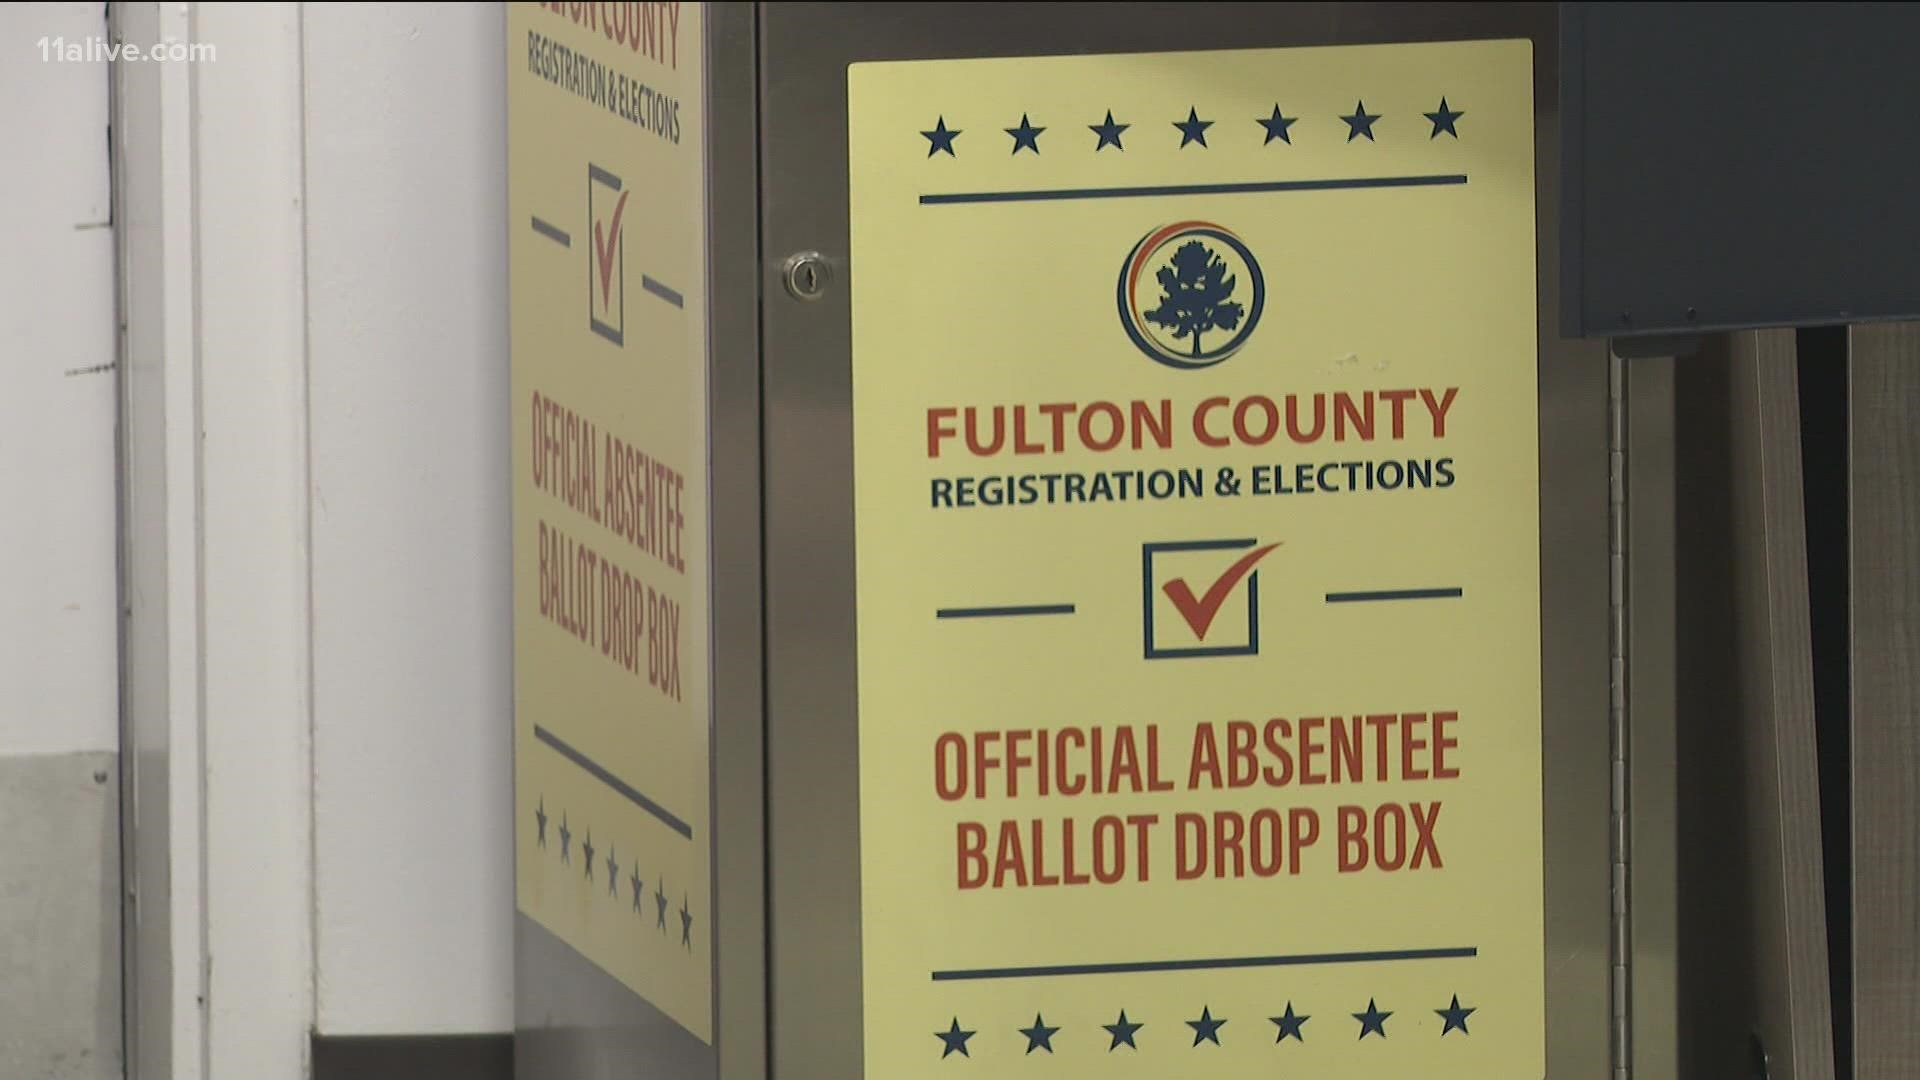 Spotlight on Fulton County, which has a history of issues at polls